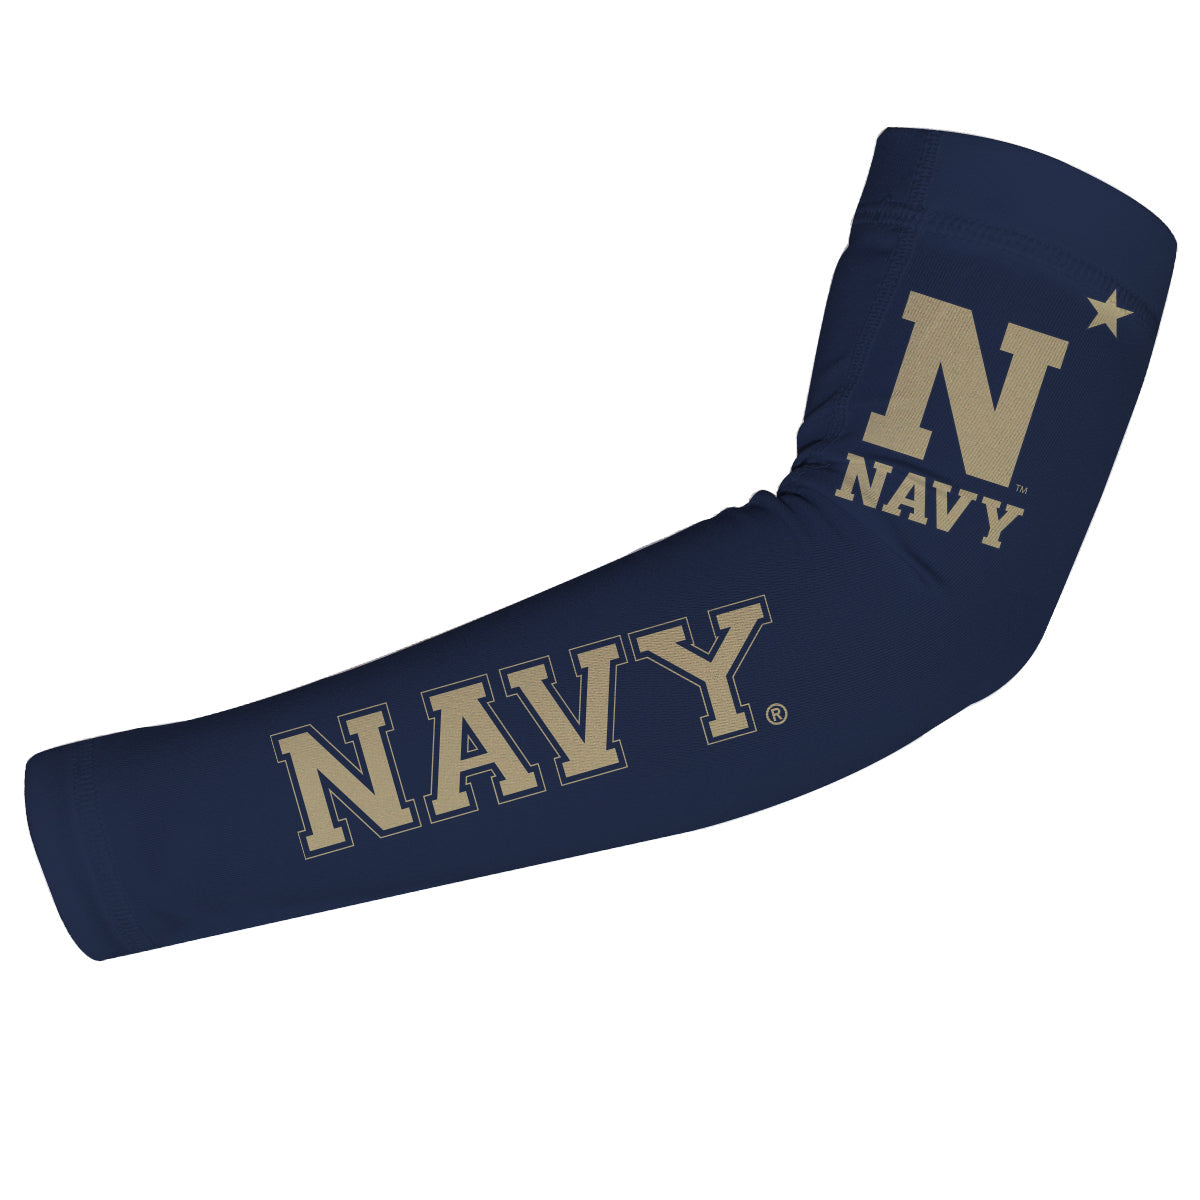 United States Naval Academy Navy Blue Arm Sleeves Pair - Vive La F̻te - Online Apparel Store